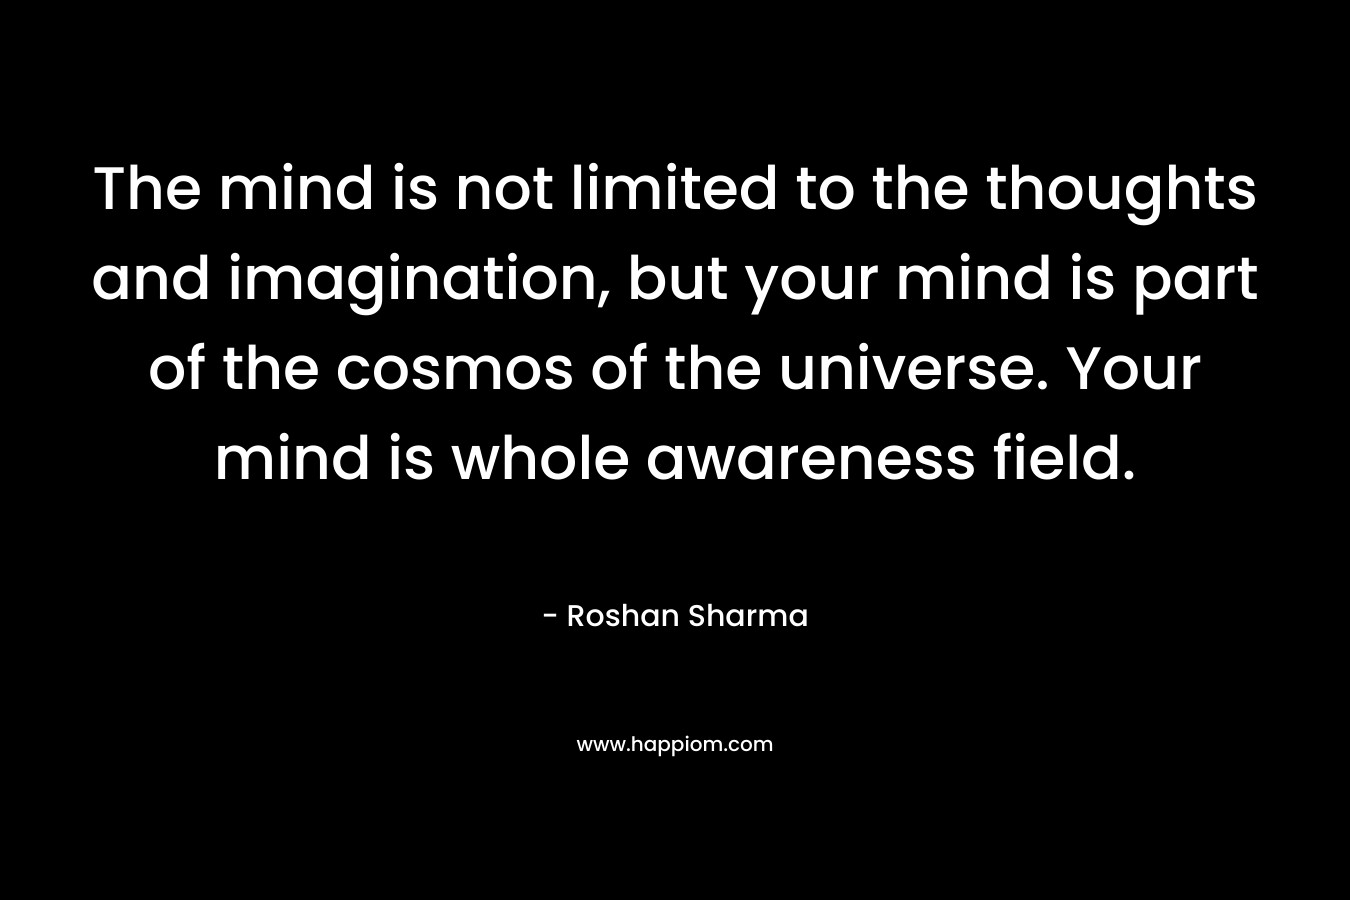 The mind is not limited to the thoughts and imagination, but your mind is part of the cosmos of the universe. Your mind is whole awareness field.